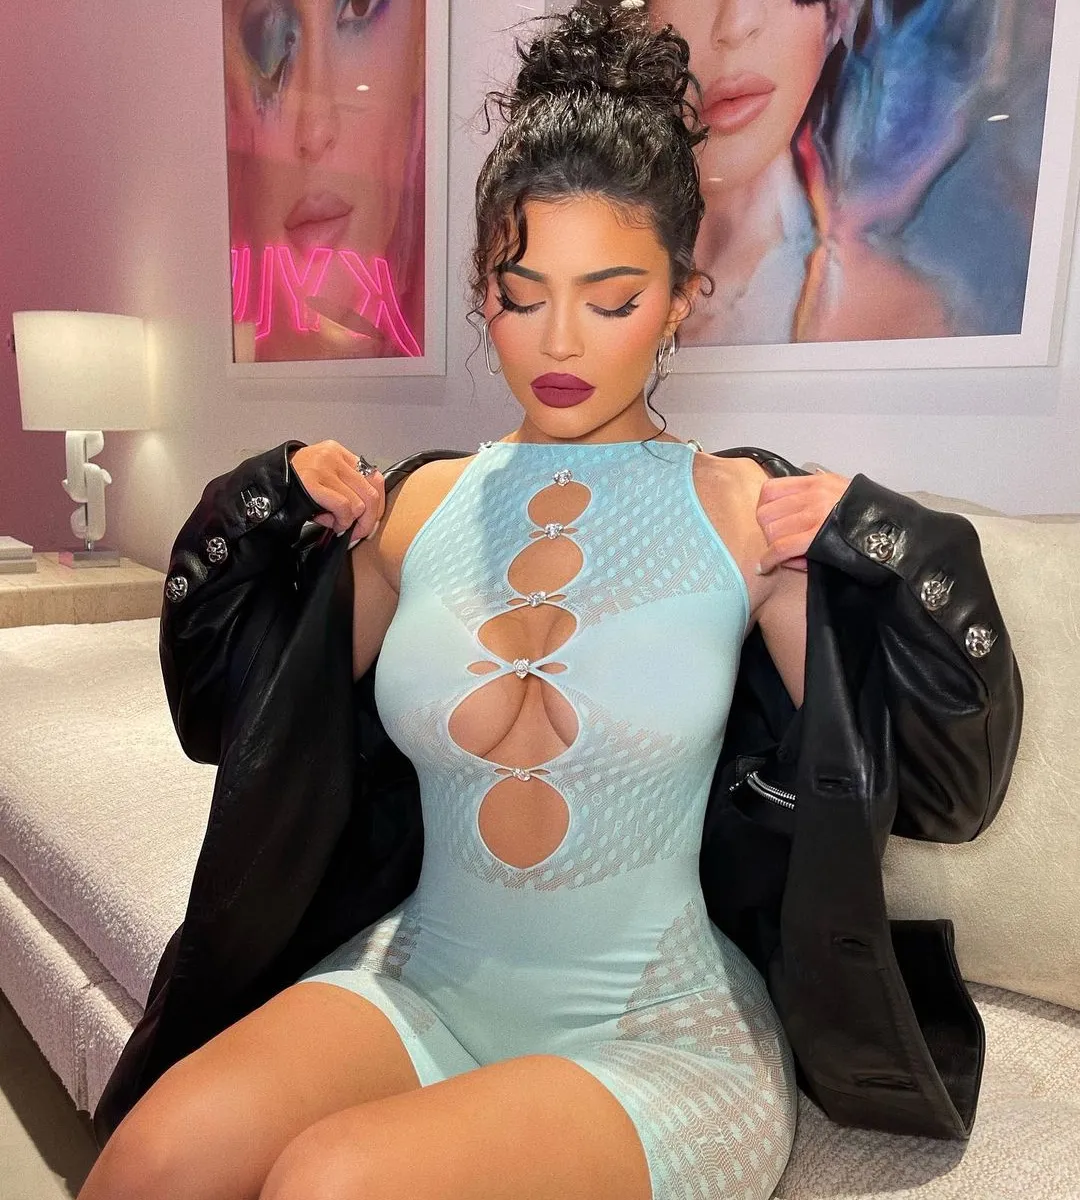 Kylie Jenner braless and nude pics